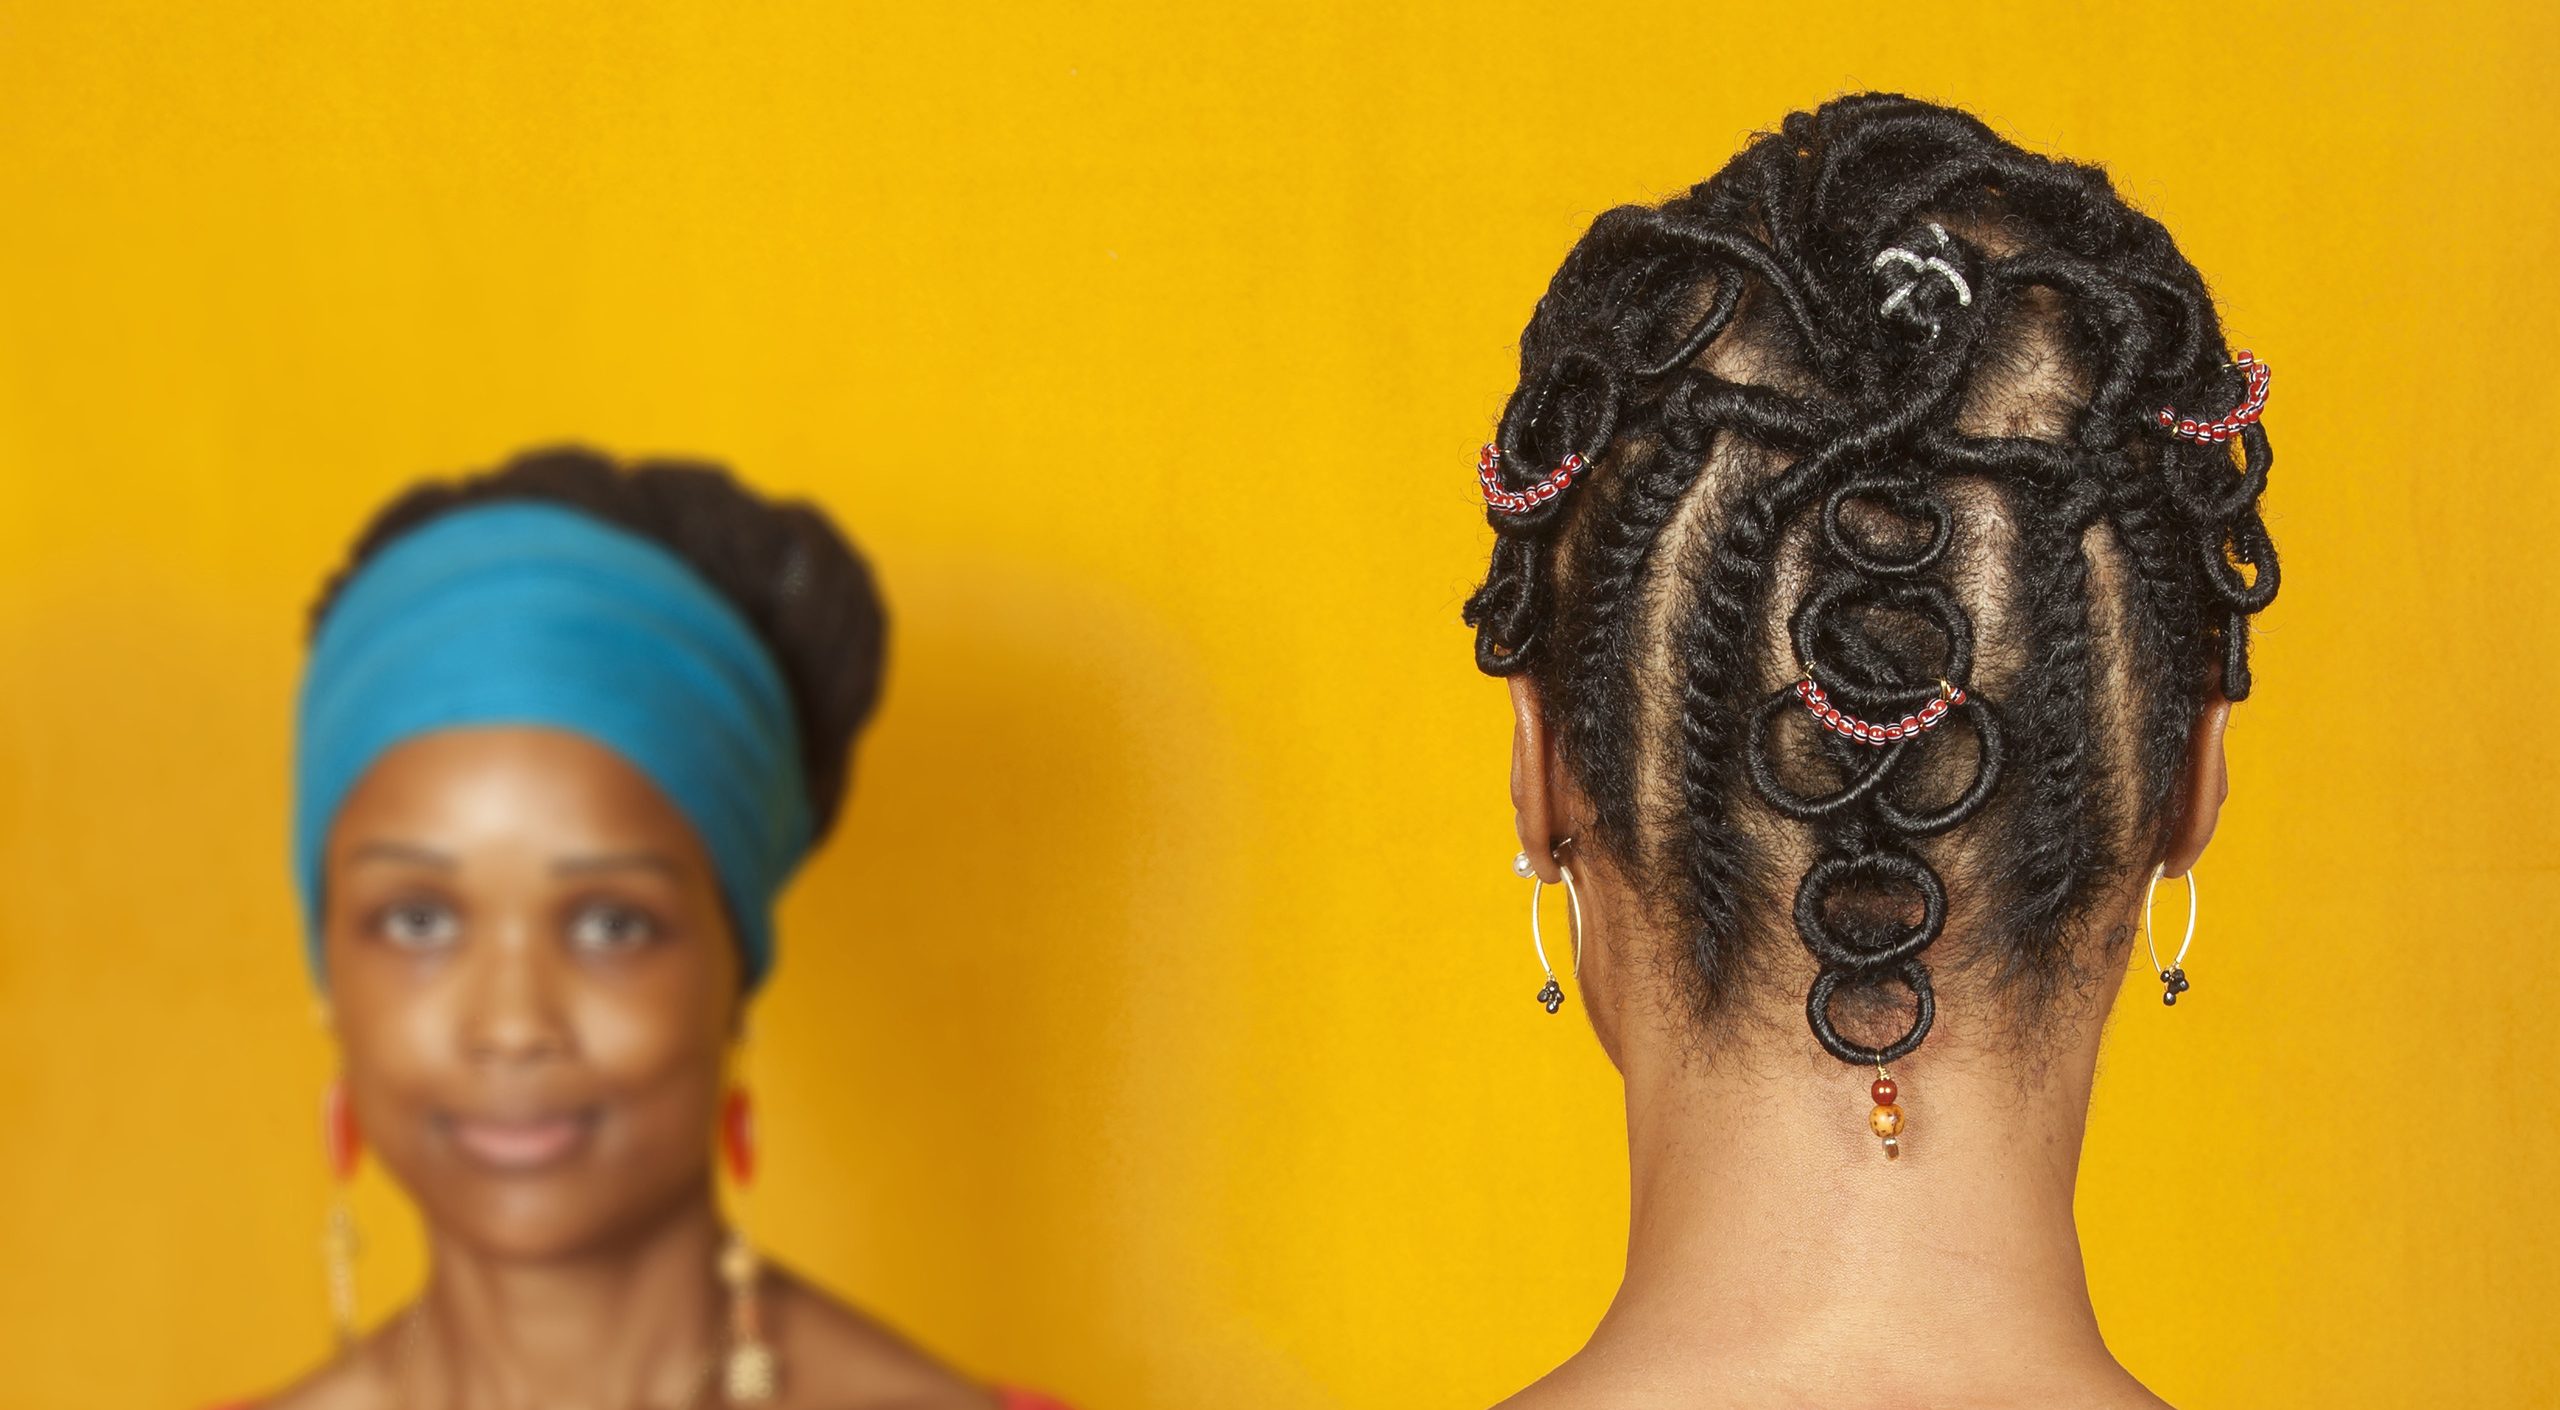 Two medium-dark skinned adult women stand in front of a goldenrod background. The woman on the left faces the viewer and wears a teal head wrap and a red top. The woman on the right faces away from the viewer, showcasing her dark hair braided into an elaborate pattern with colorful beads.